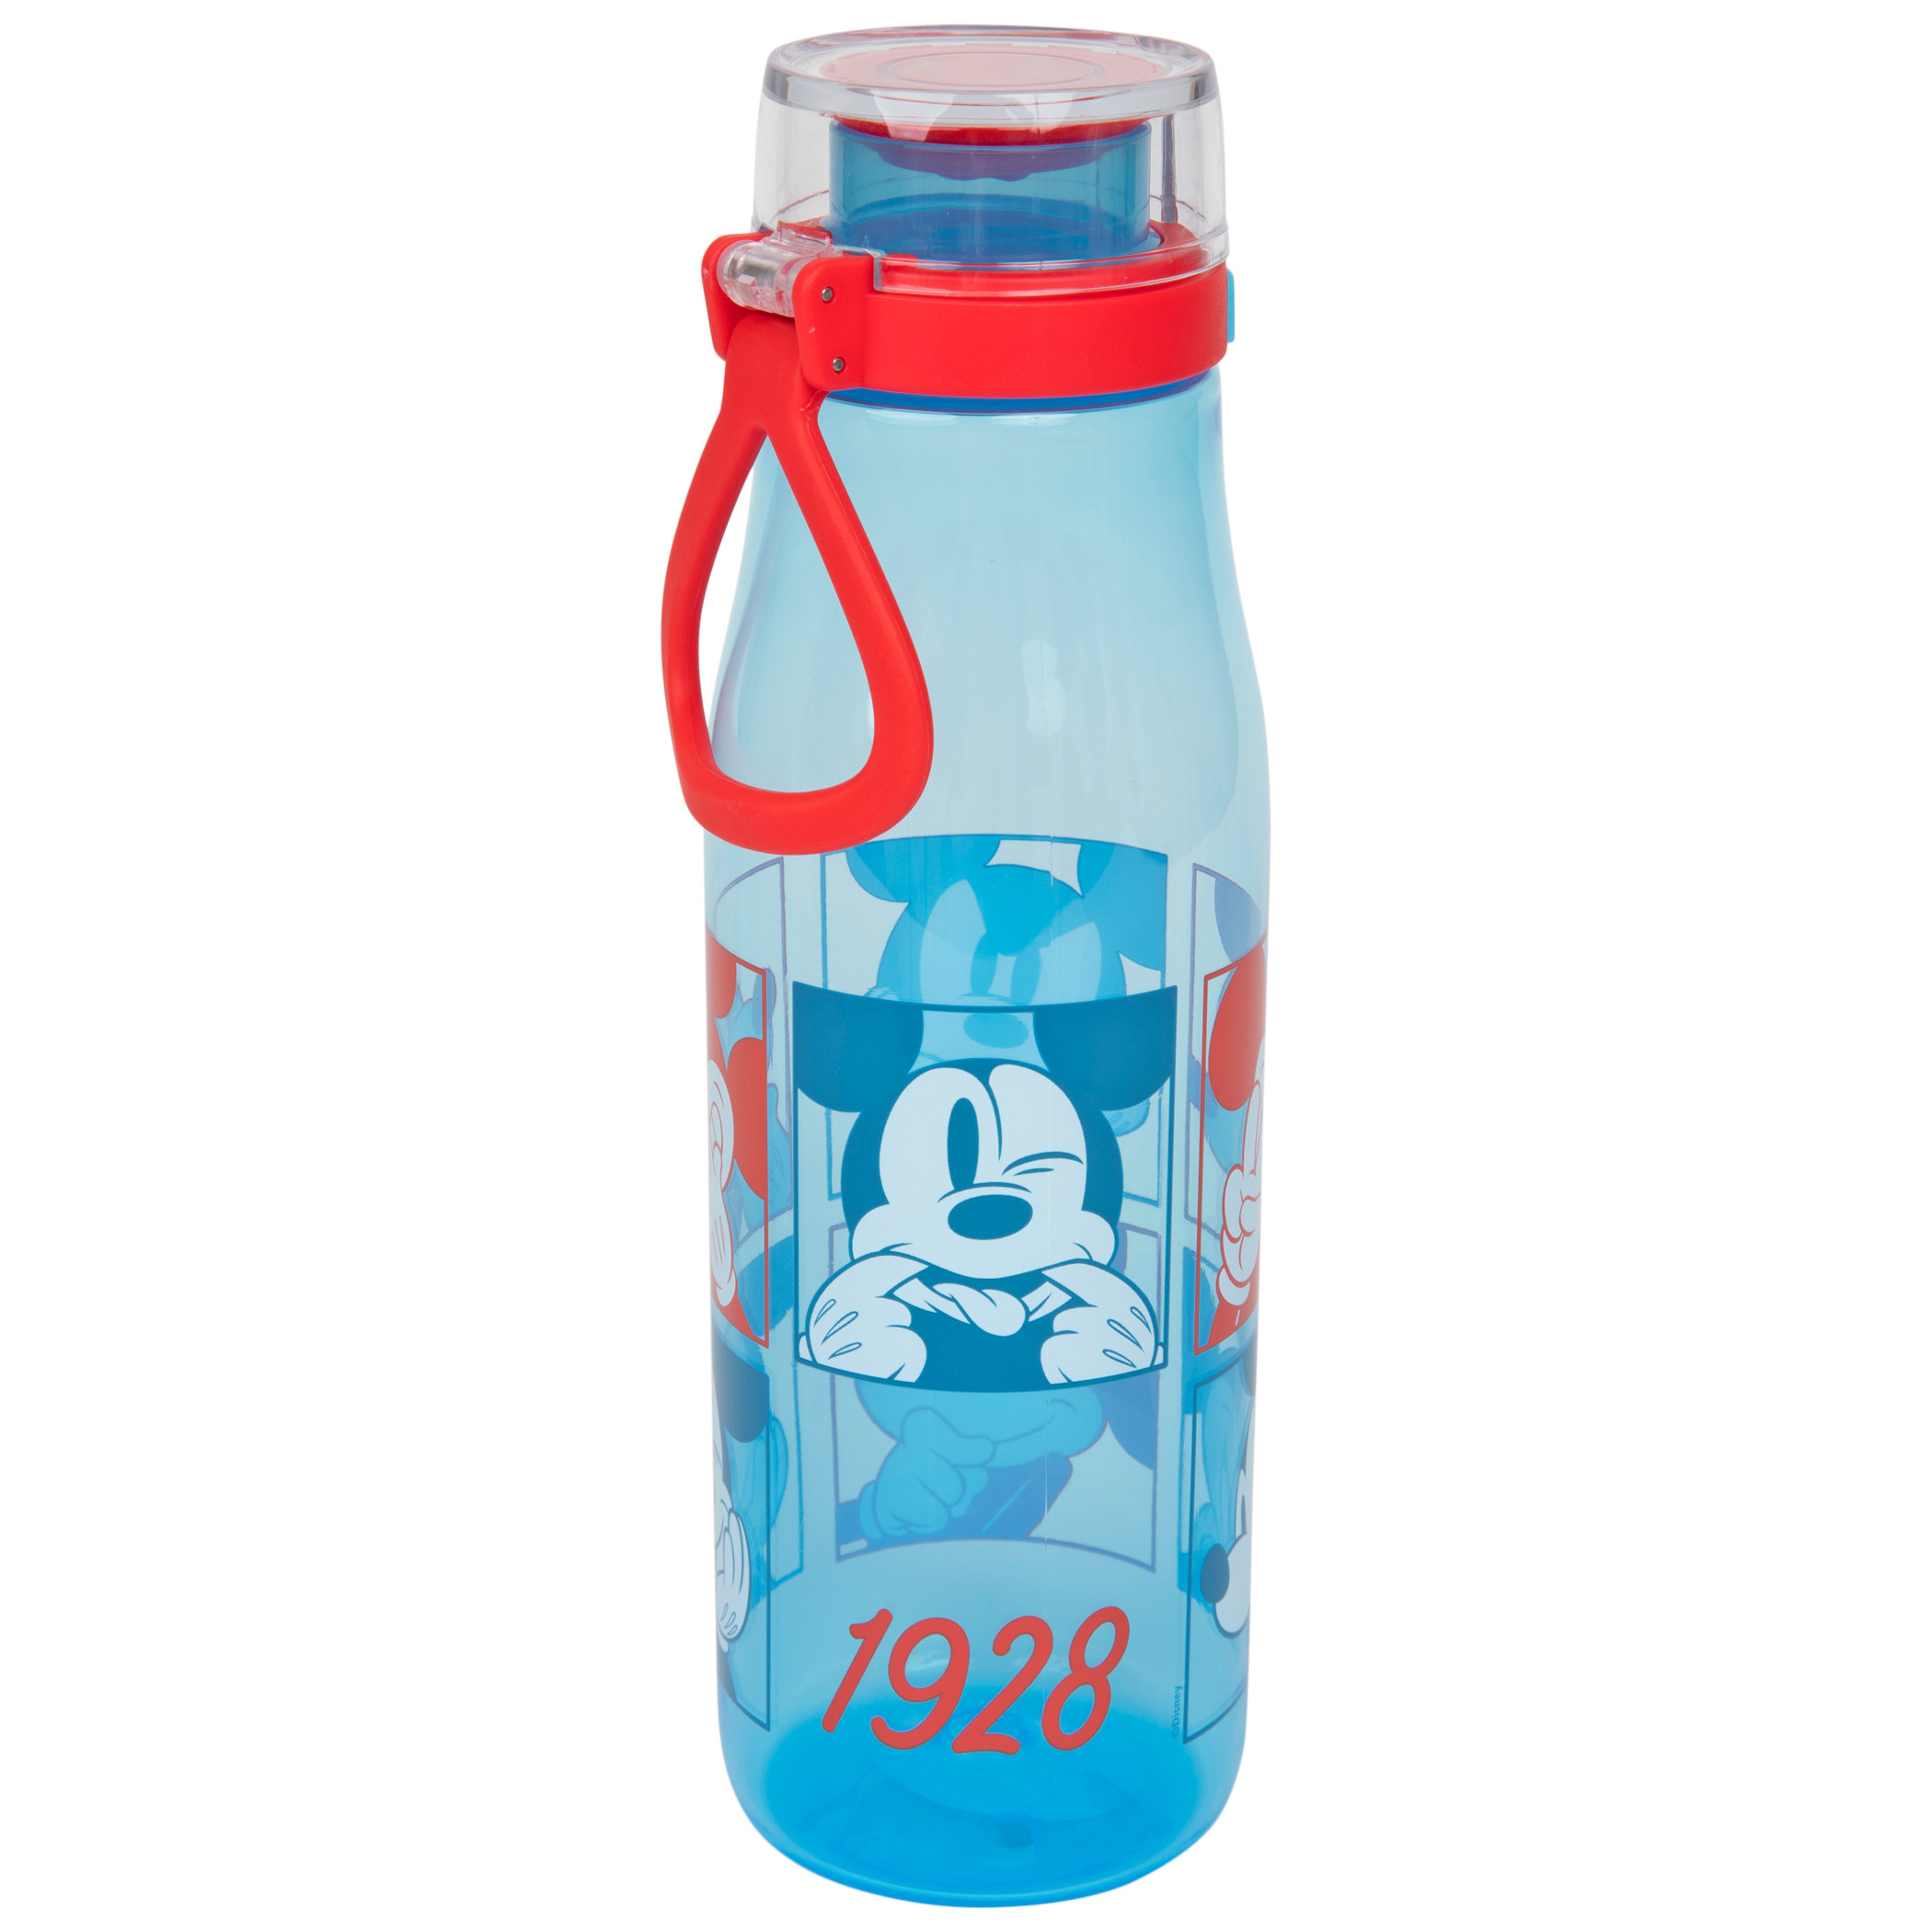 Disney Mickey Mouse Mood and Faces 25 oz. Silicone Handle Water Bottle